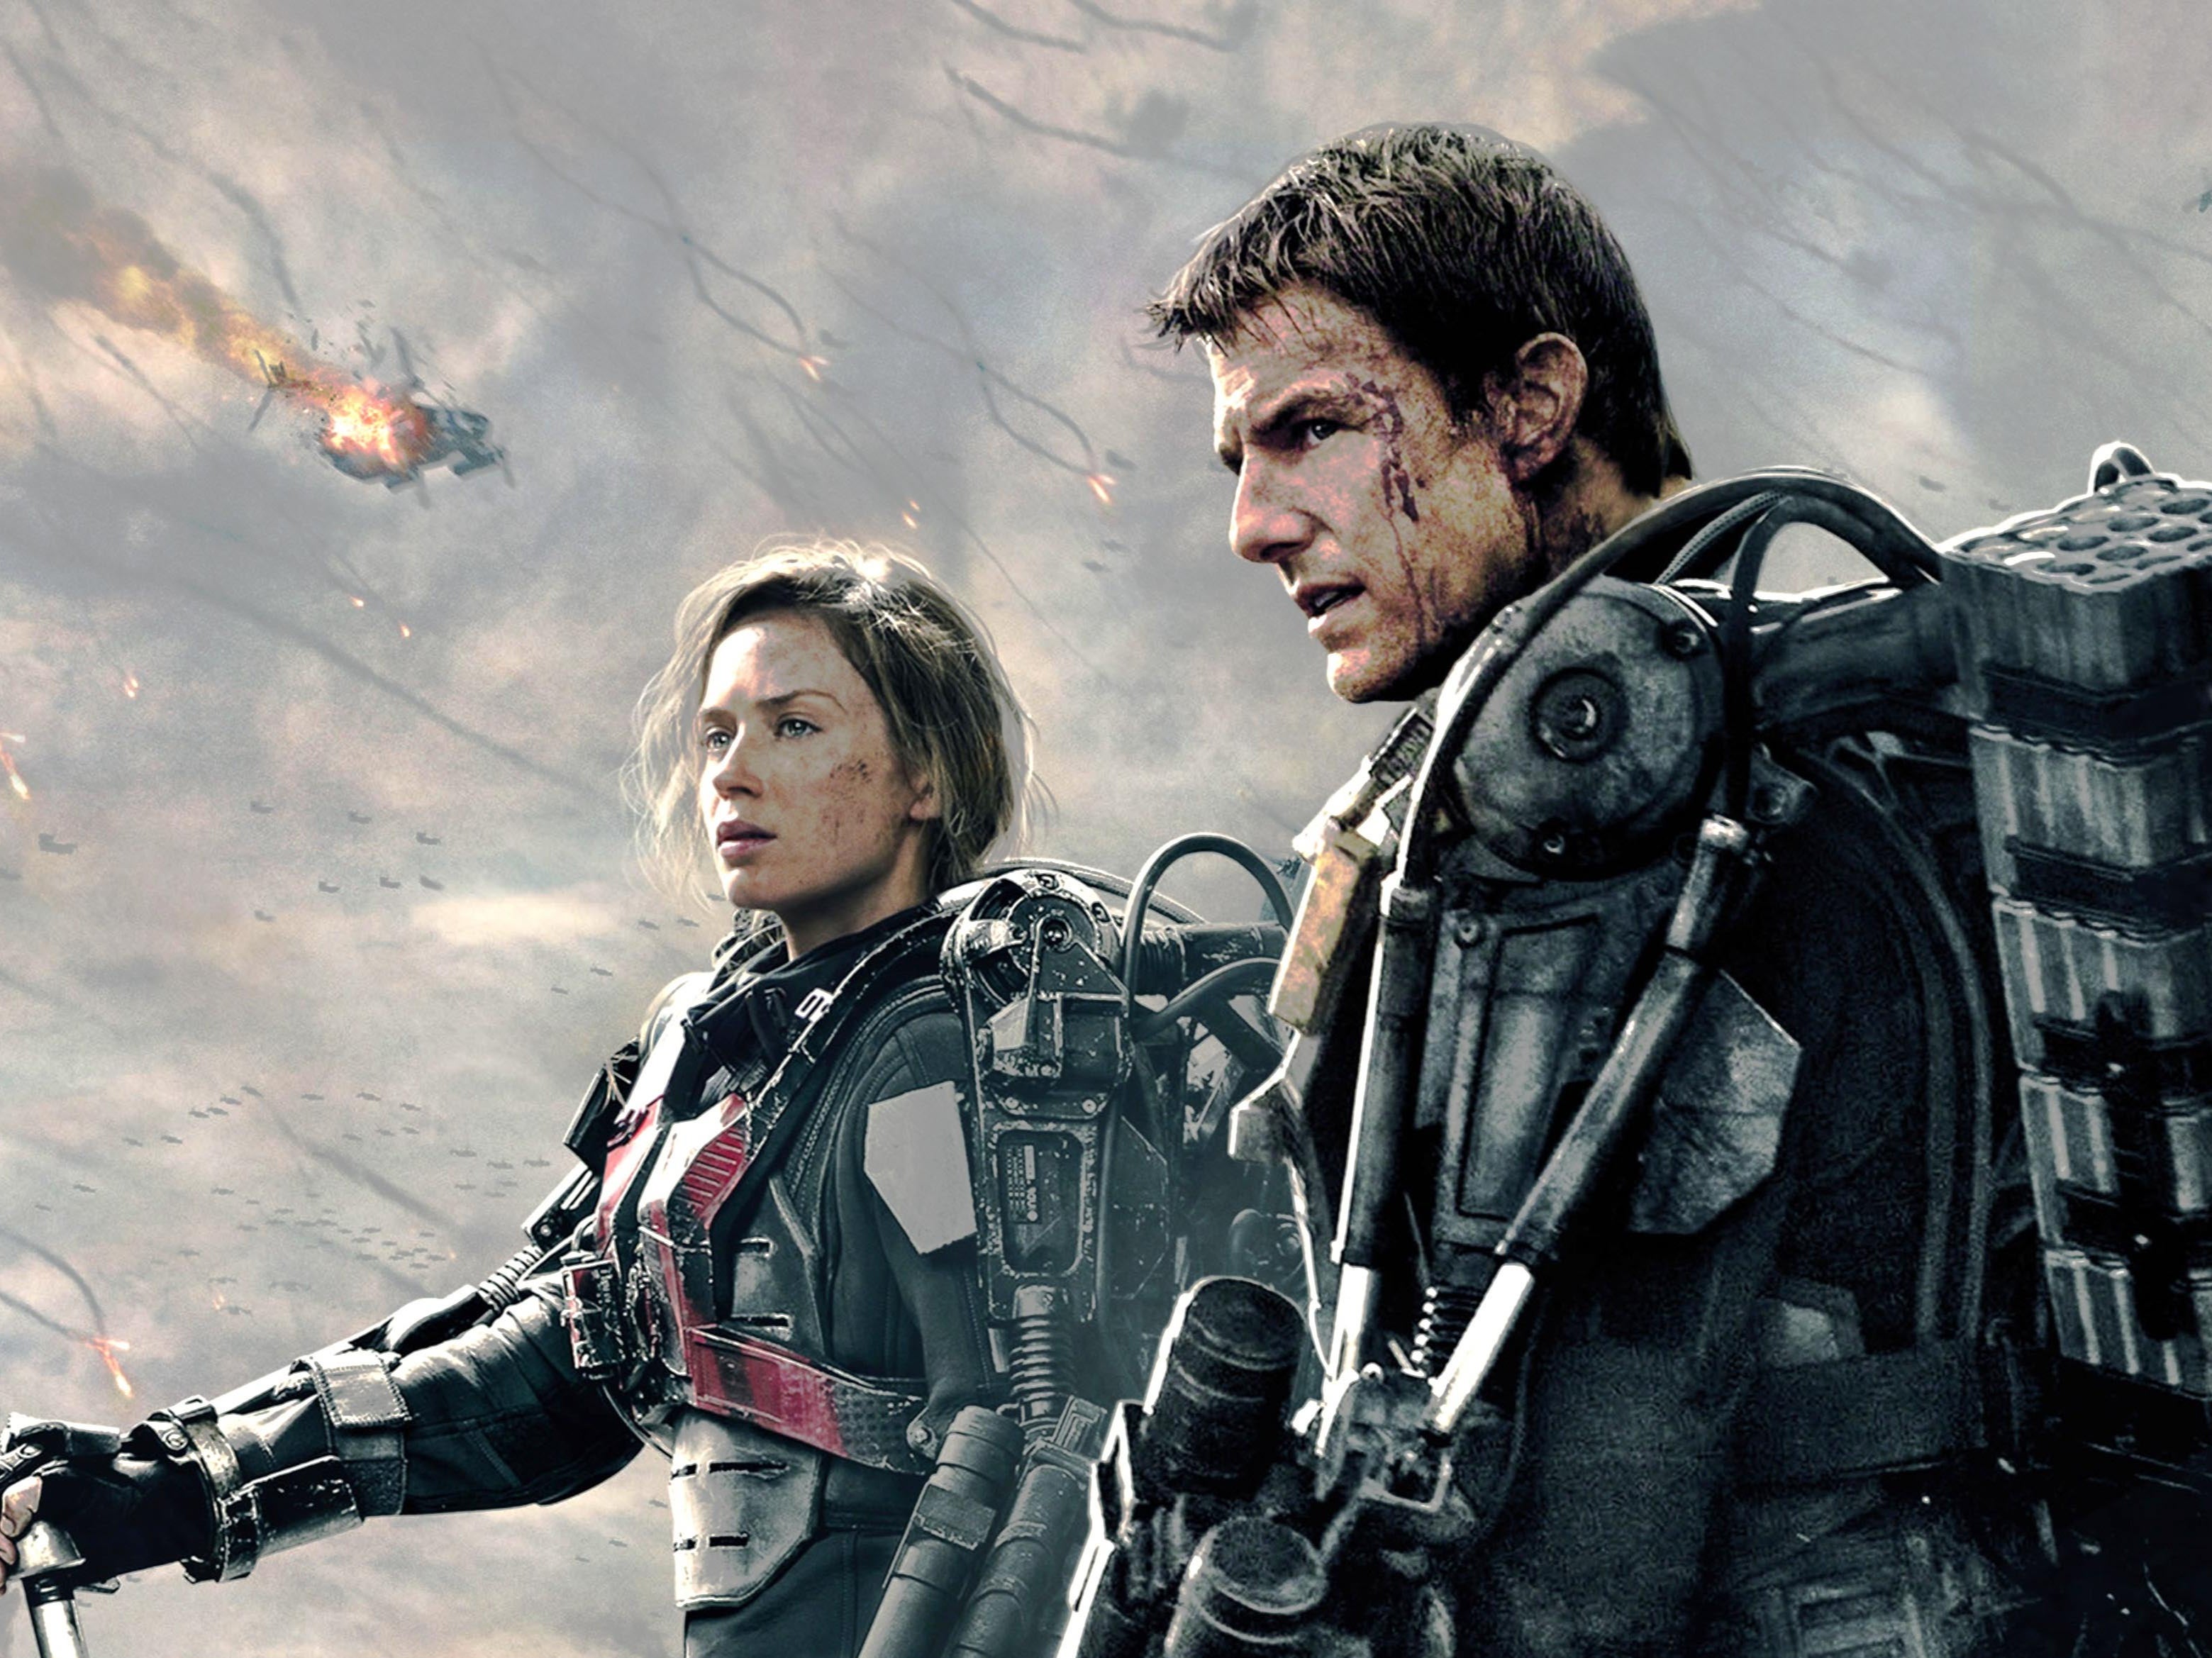 Emily Bunt and Tom Cruise in their ‘heavy’ robotic suits in ‘Edge of Tomorrow’